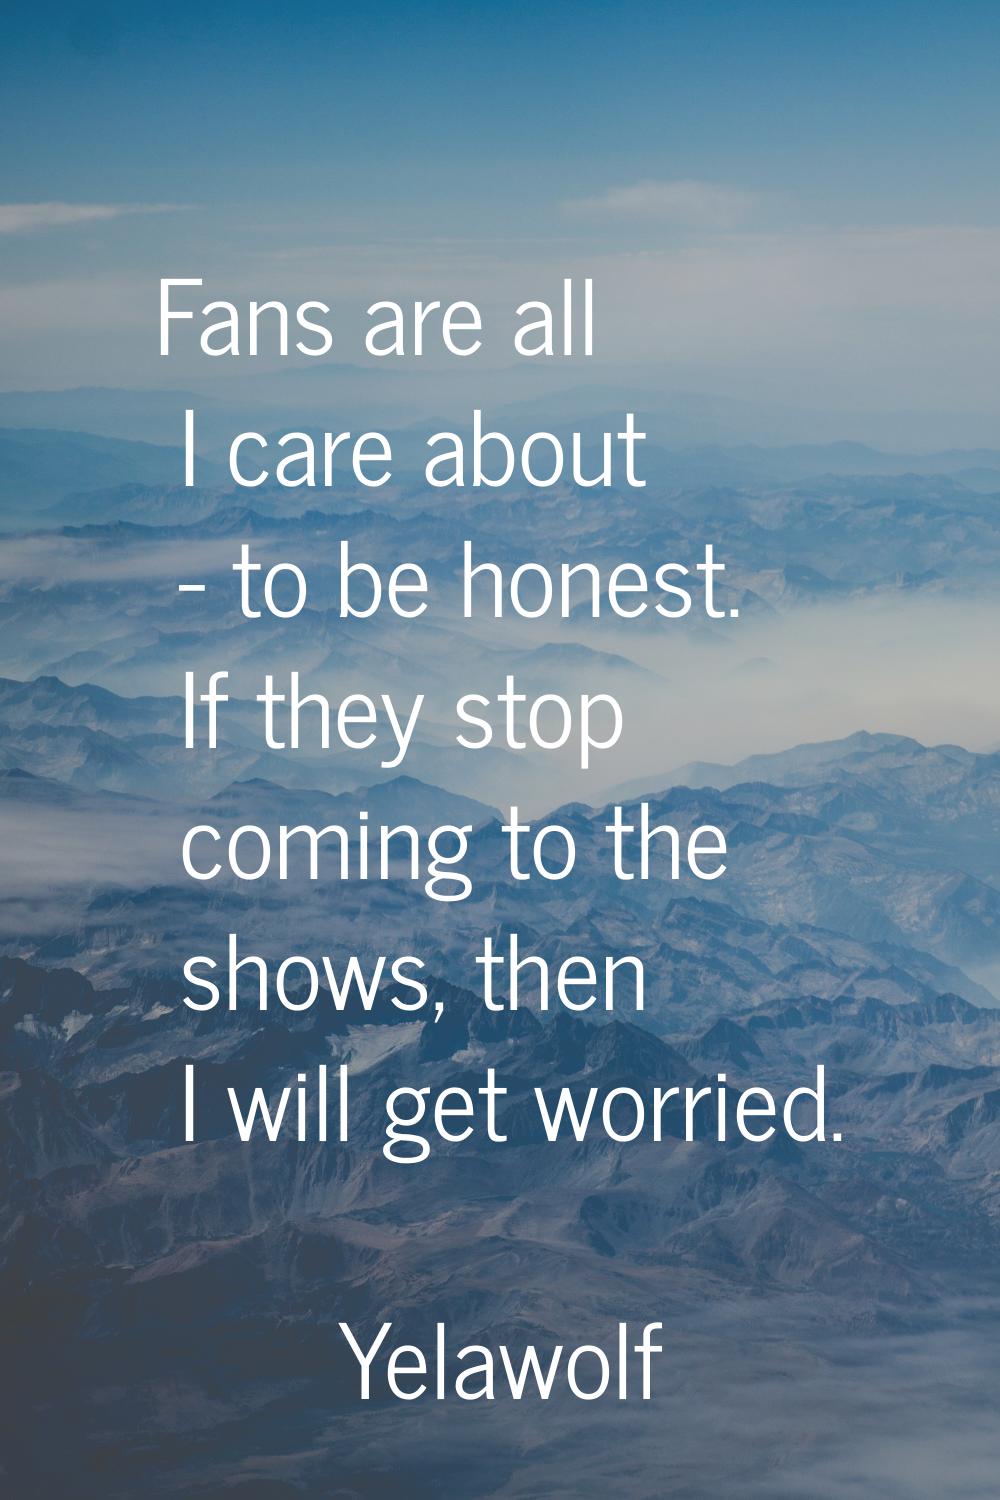 Fans are all I care about - to be honest. If they stop coming to the shows, then I will get worried